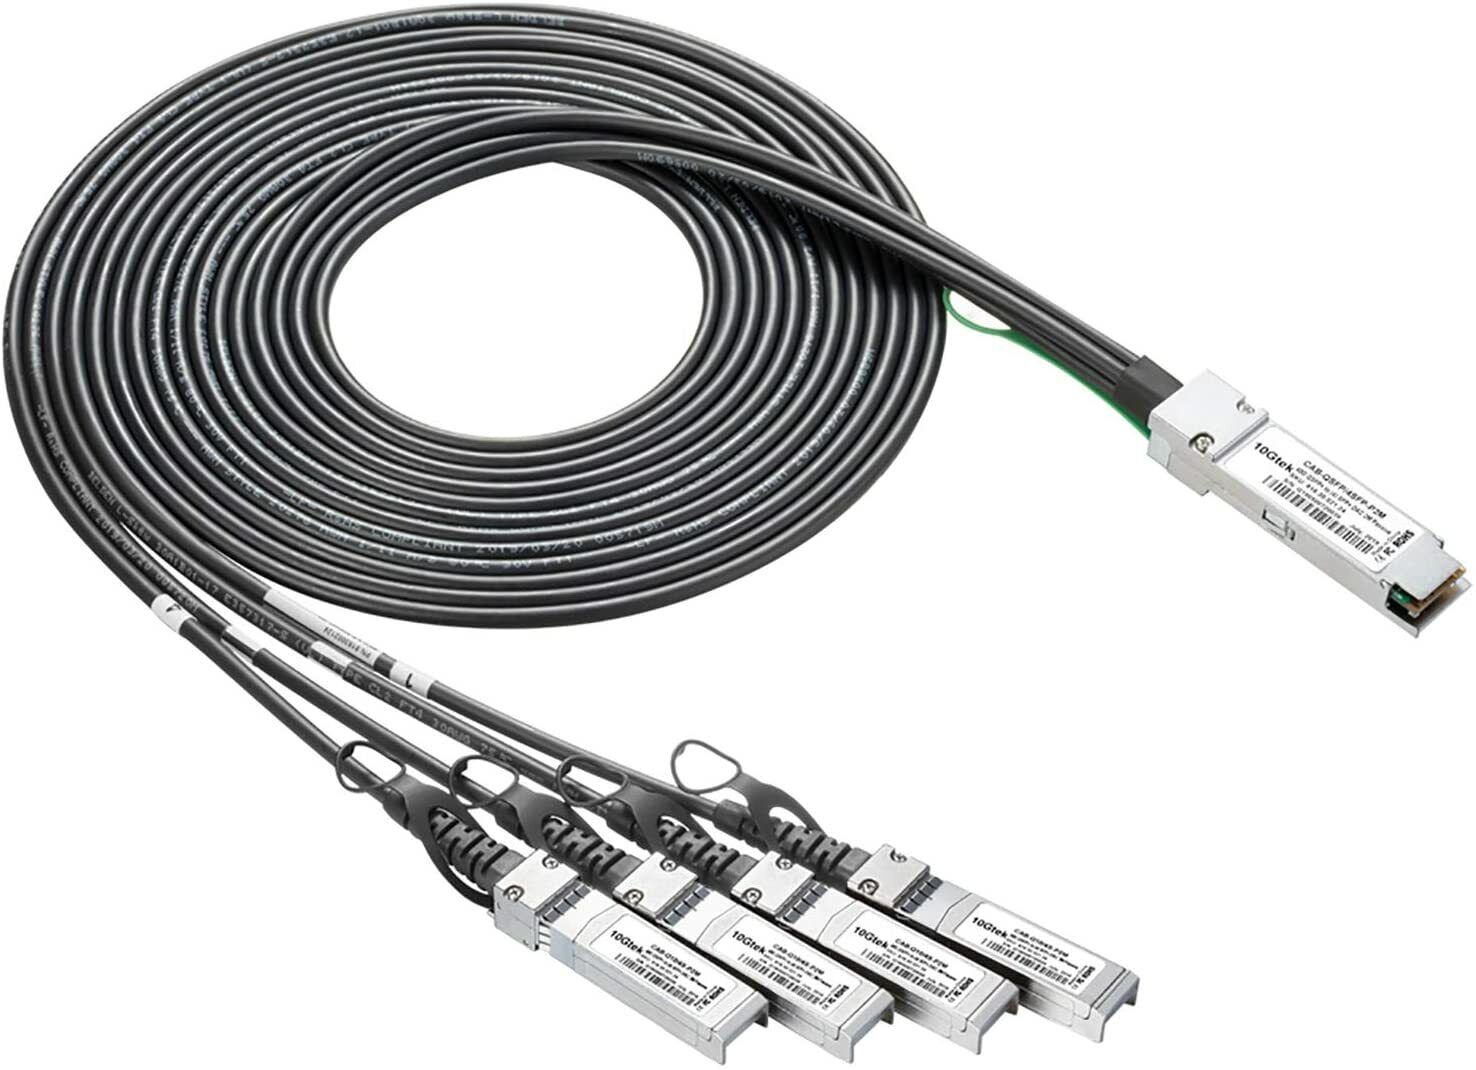 For Cisco QSFP-4SFP10G-CU3M 40G QSFP+ to 4xSFP+ Breakout DAC Cable 3 Meter(10ft)